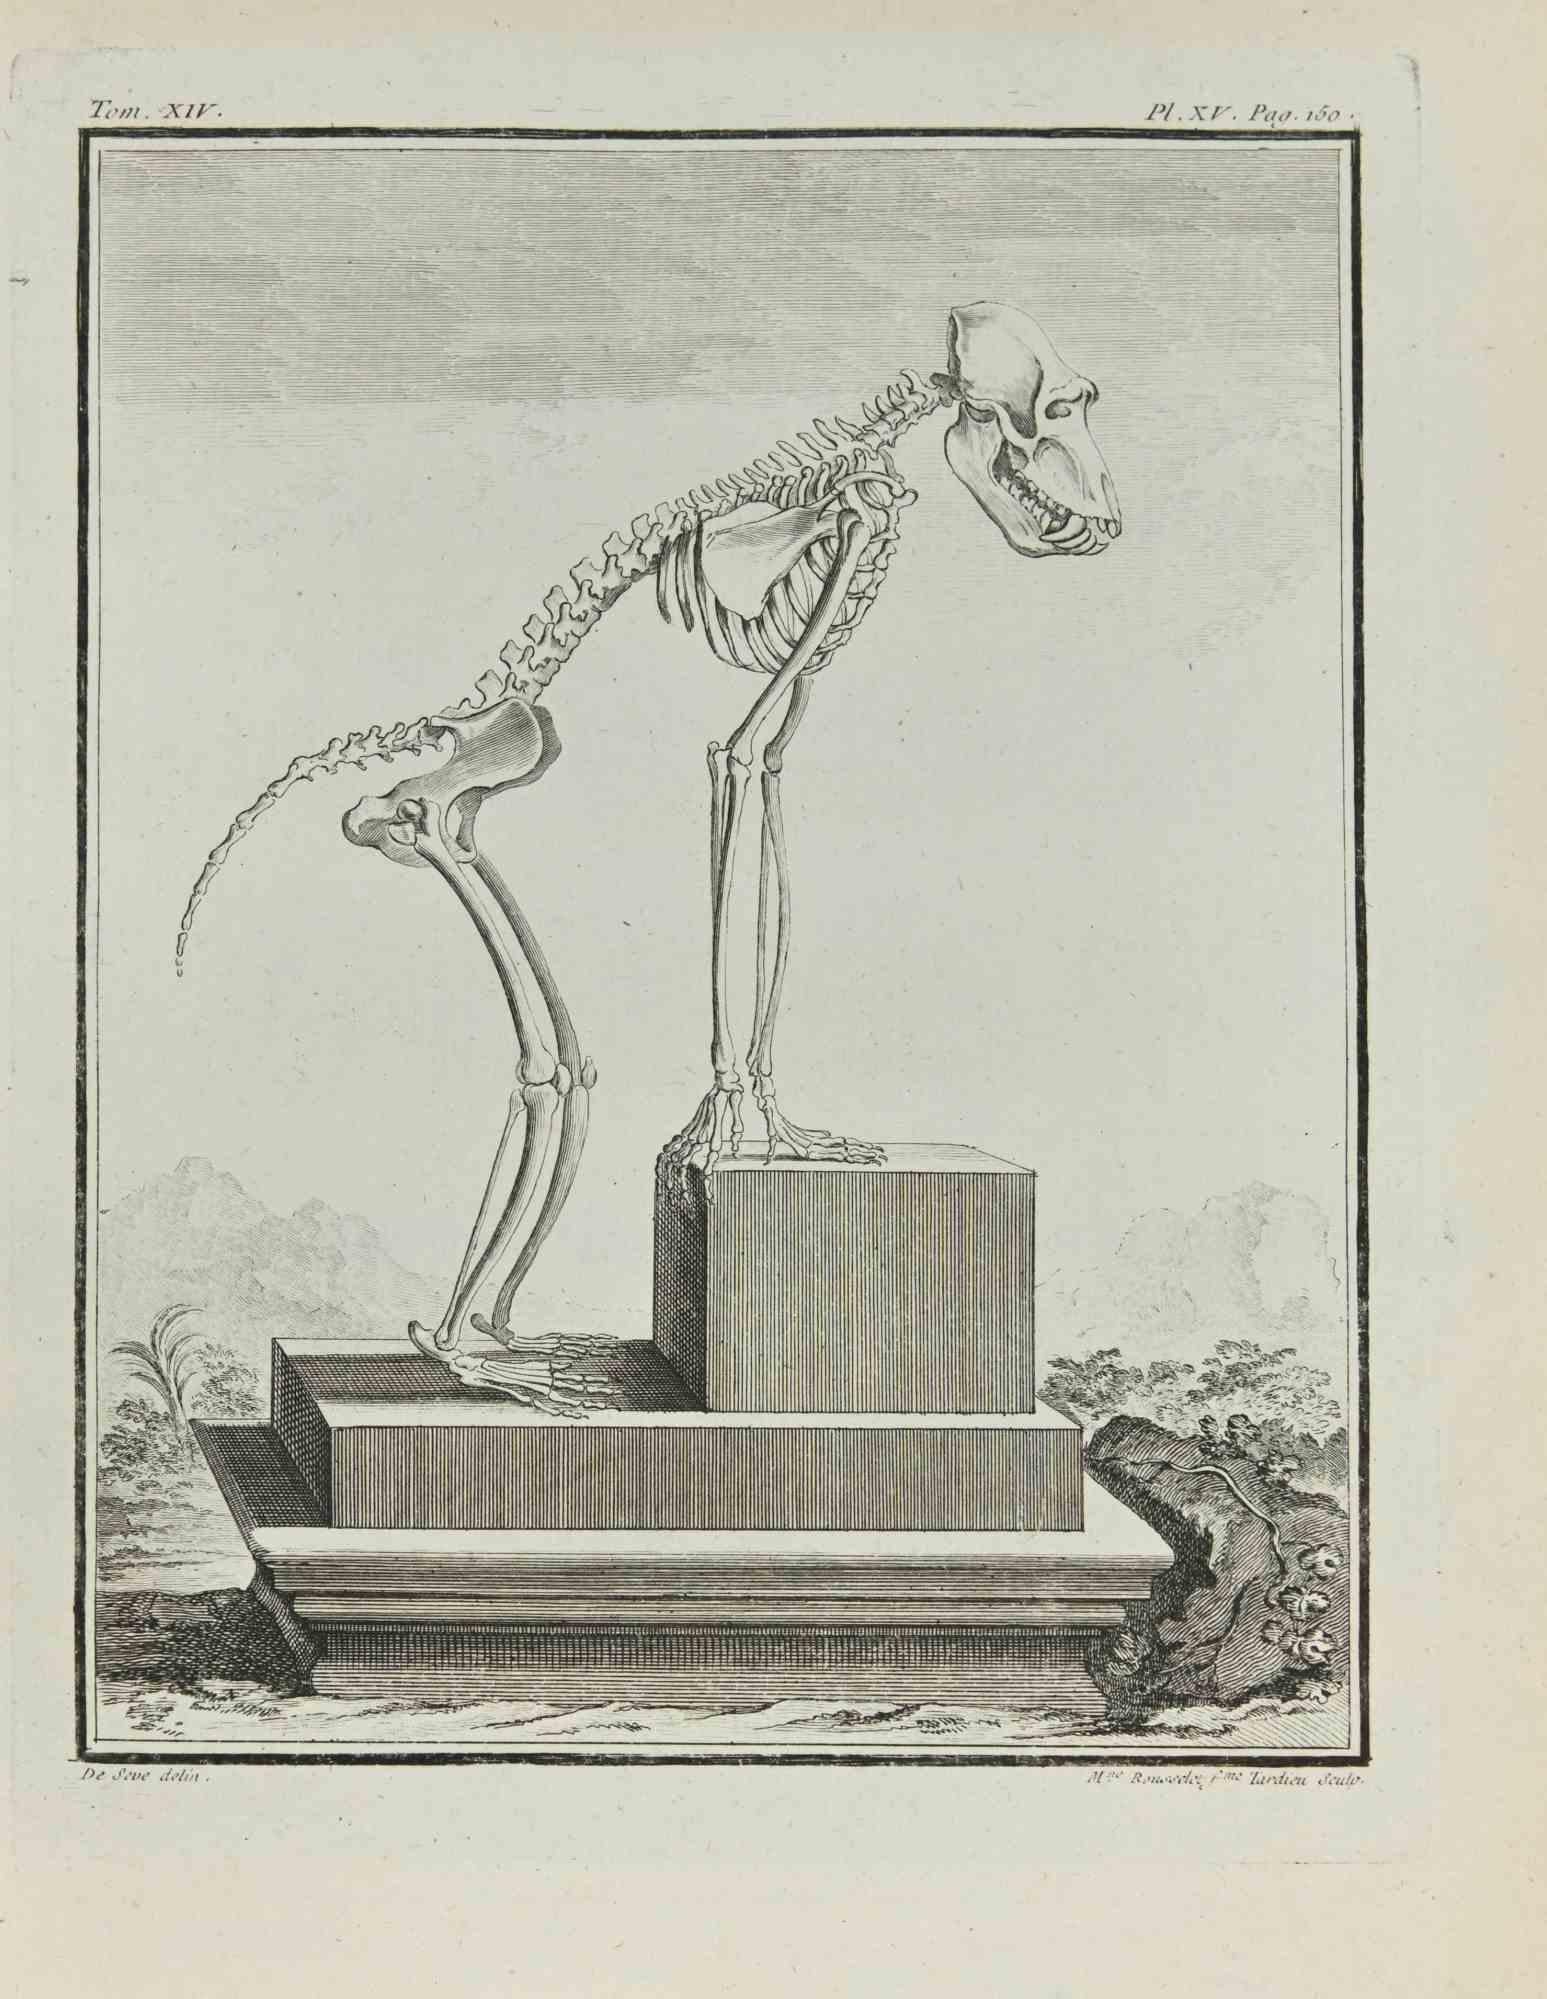 The Skeleton - Etching by Madeline Rousselet - 1771